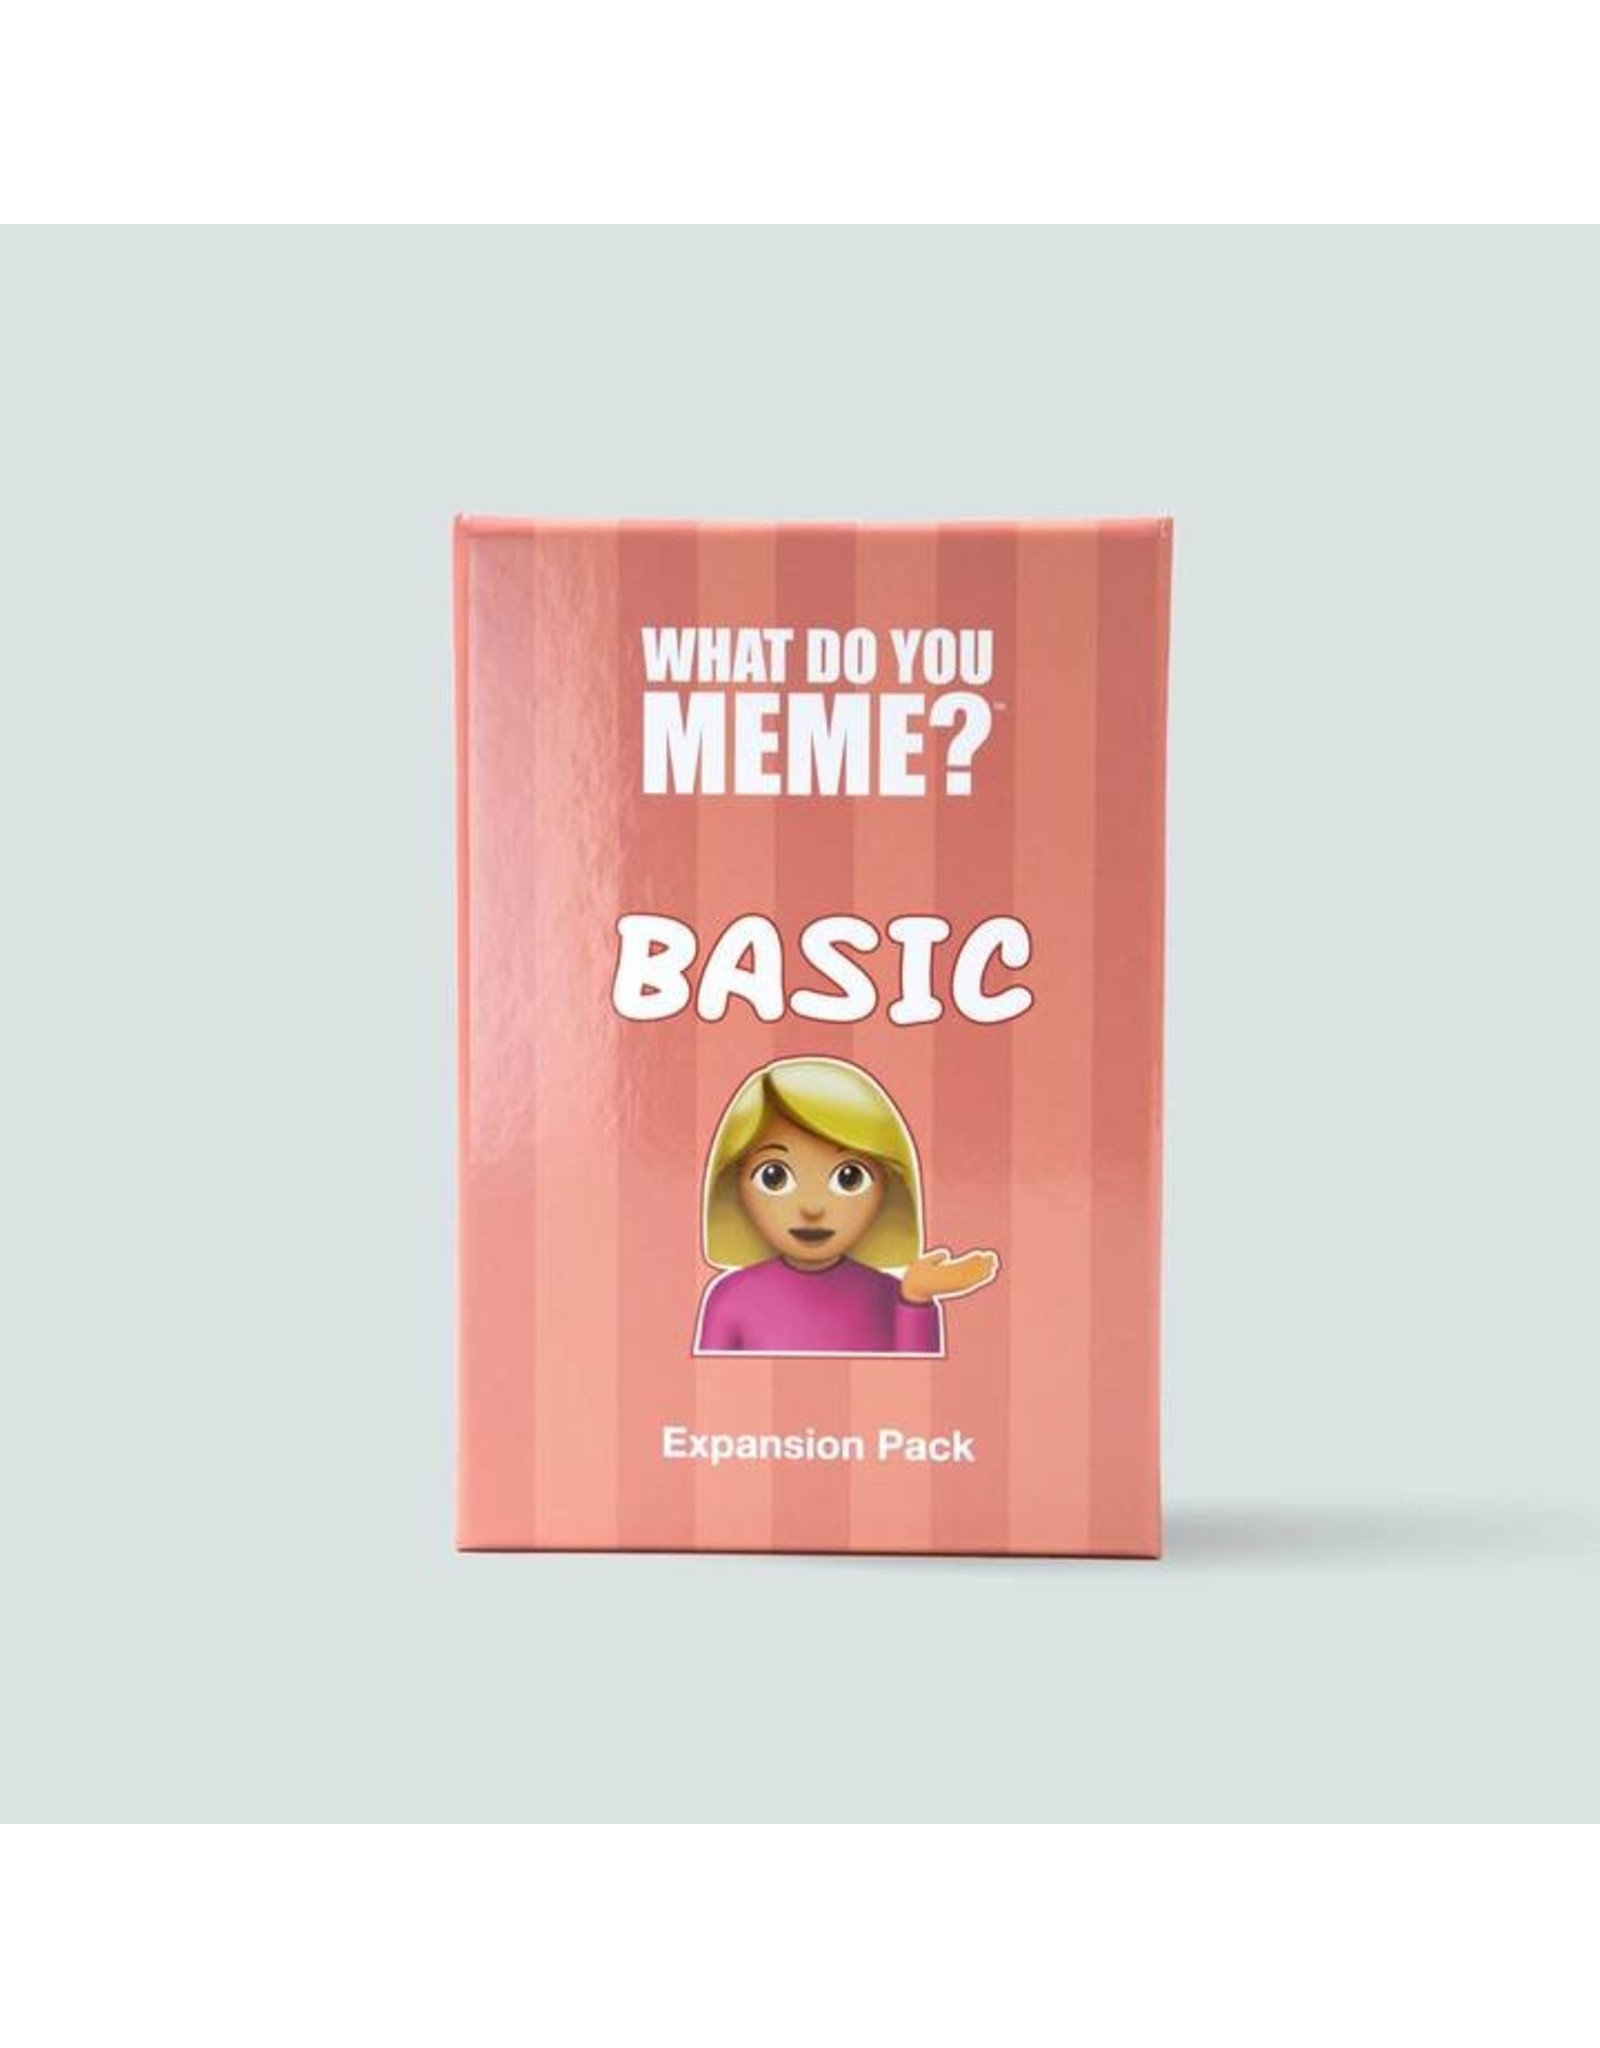 What Do You Meme What Do You Meme? - Basic Expansion